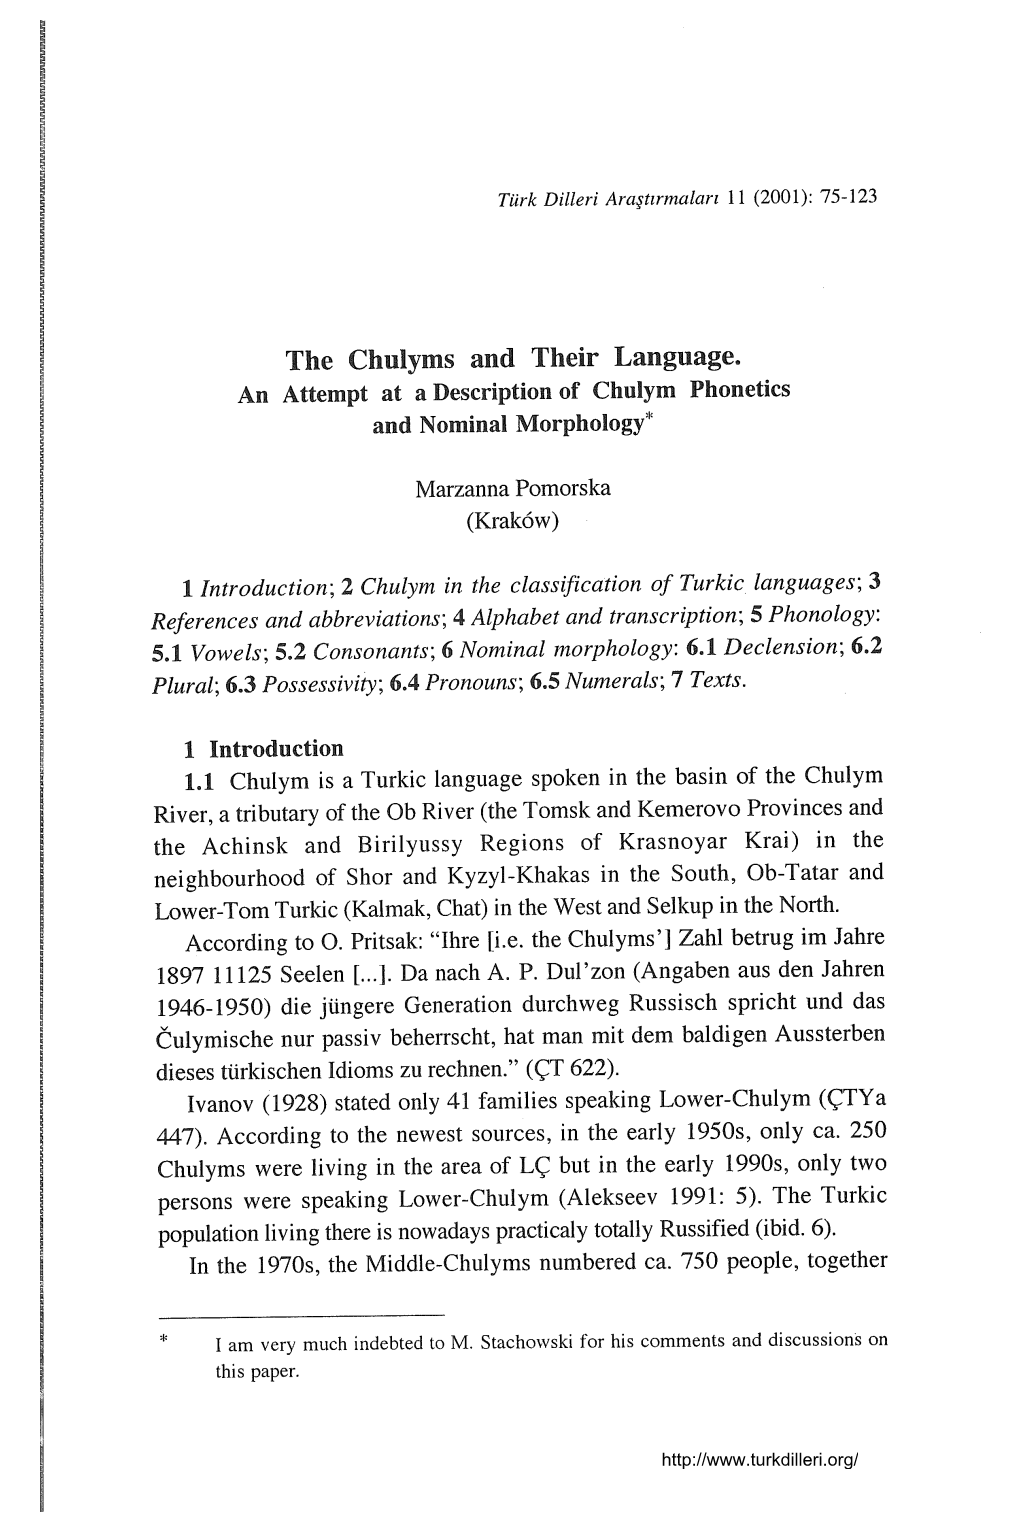 The Chulyms and Their Language. an Attempt at a Description of Chulym Phonetics and Nominal Morphology*